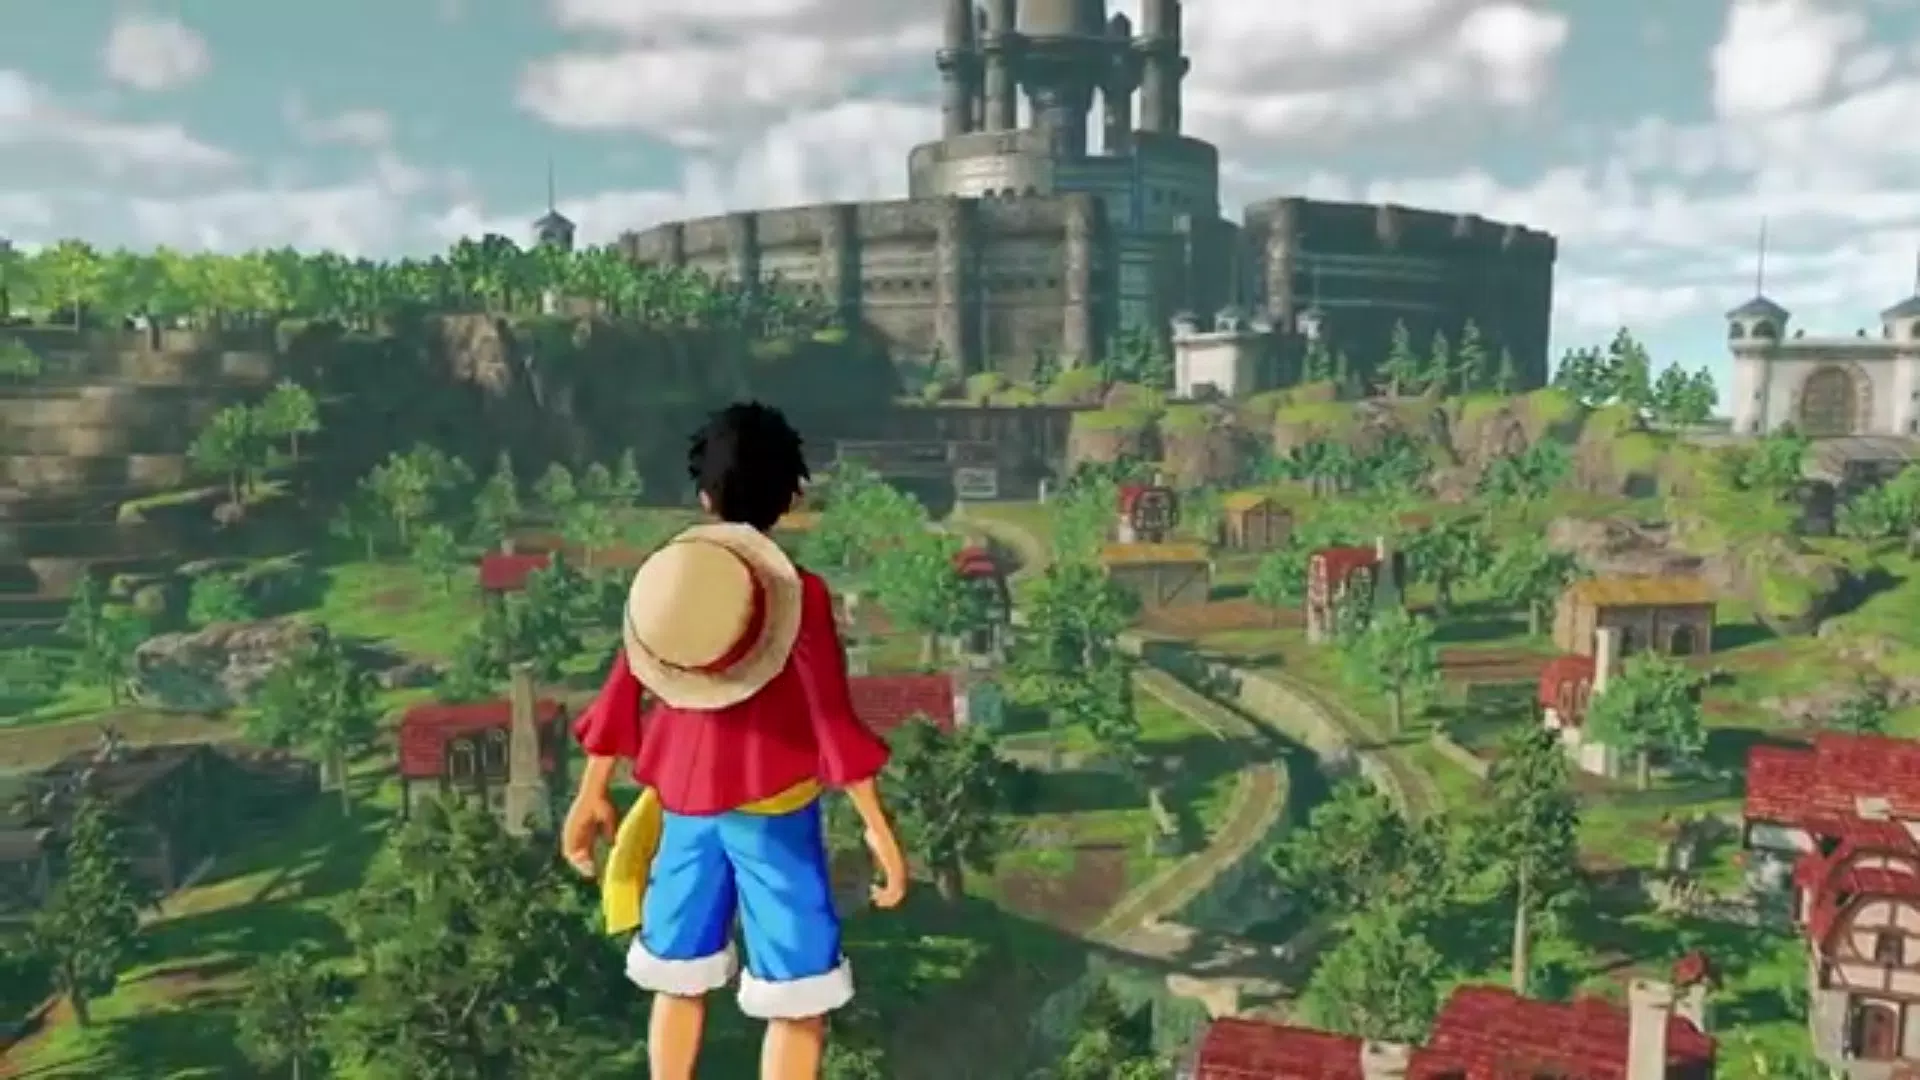 One Piece World Seeker Android Mobile, Gameplay & Download